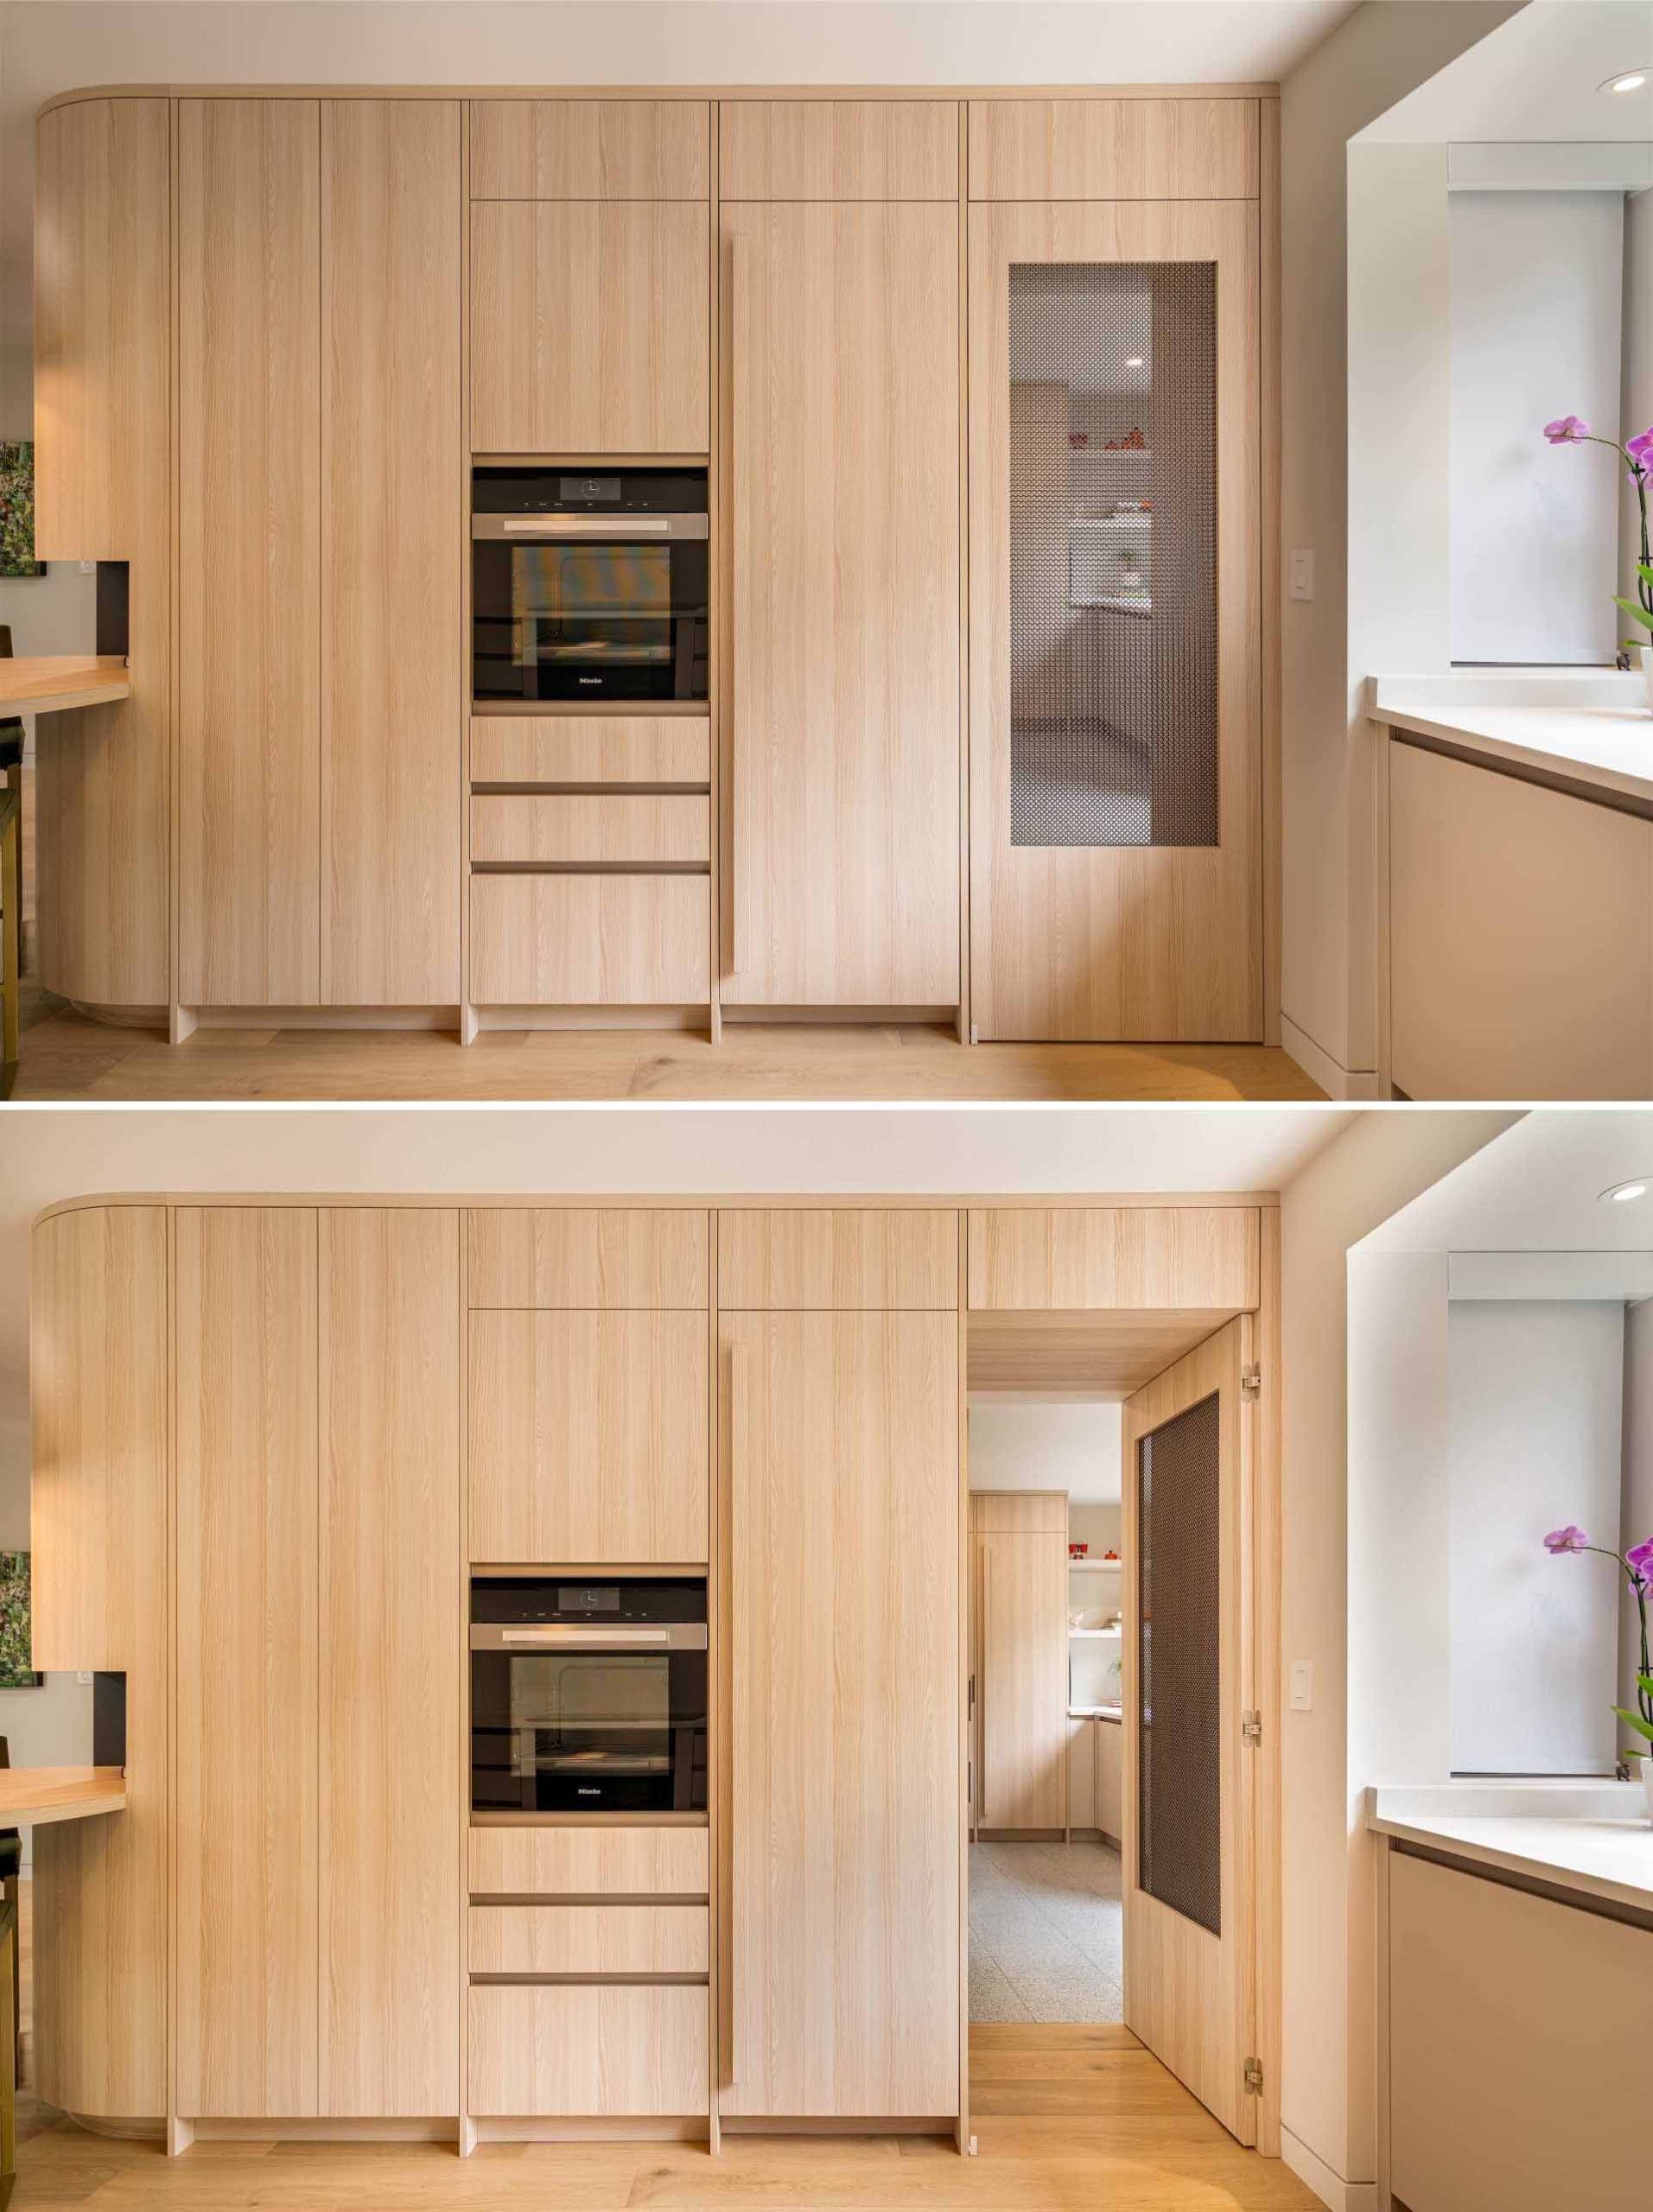 A hidden walk-in pantry is located behind a door with a mesh screen and includes an abundance of storage, additional counter space, and a sink.